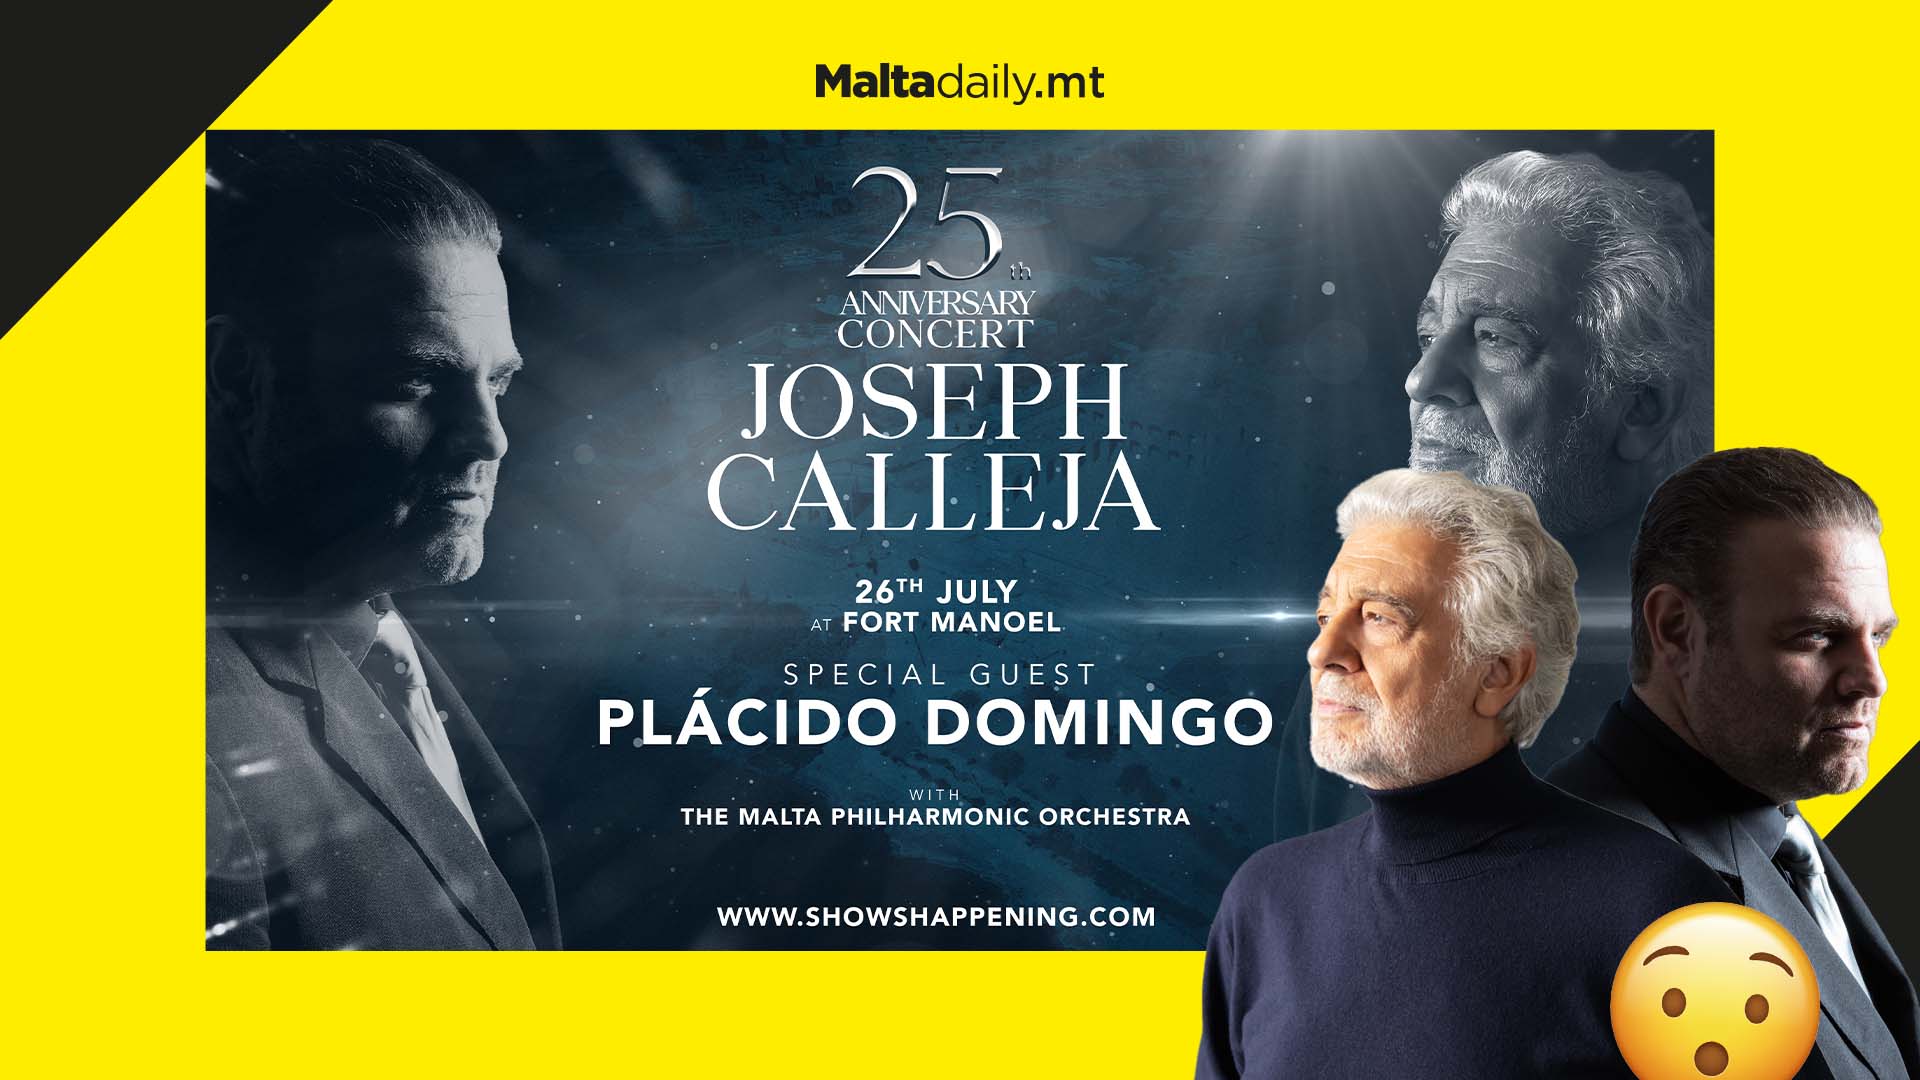 Plácido Domingo to be special guest at Joseph Calleja 25th Anniversary Concert